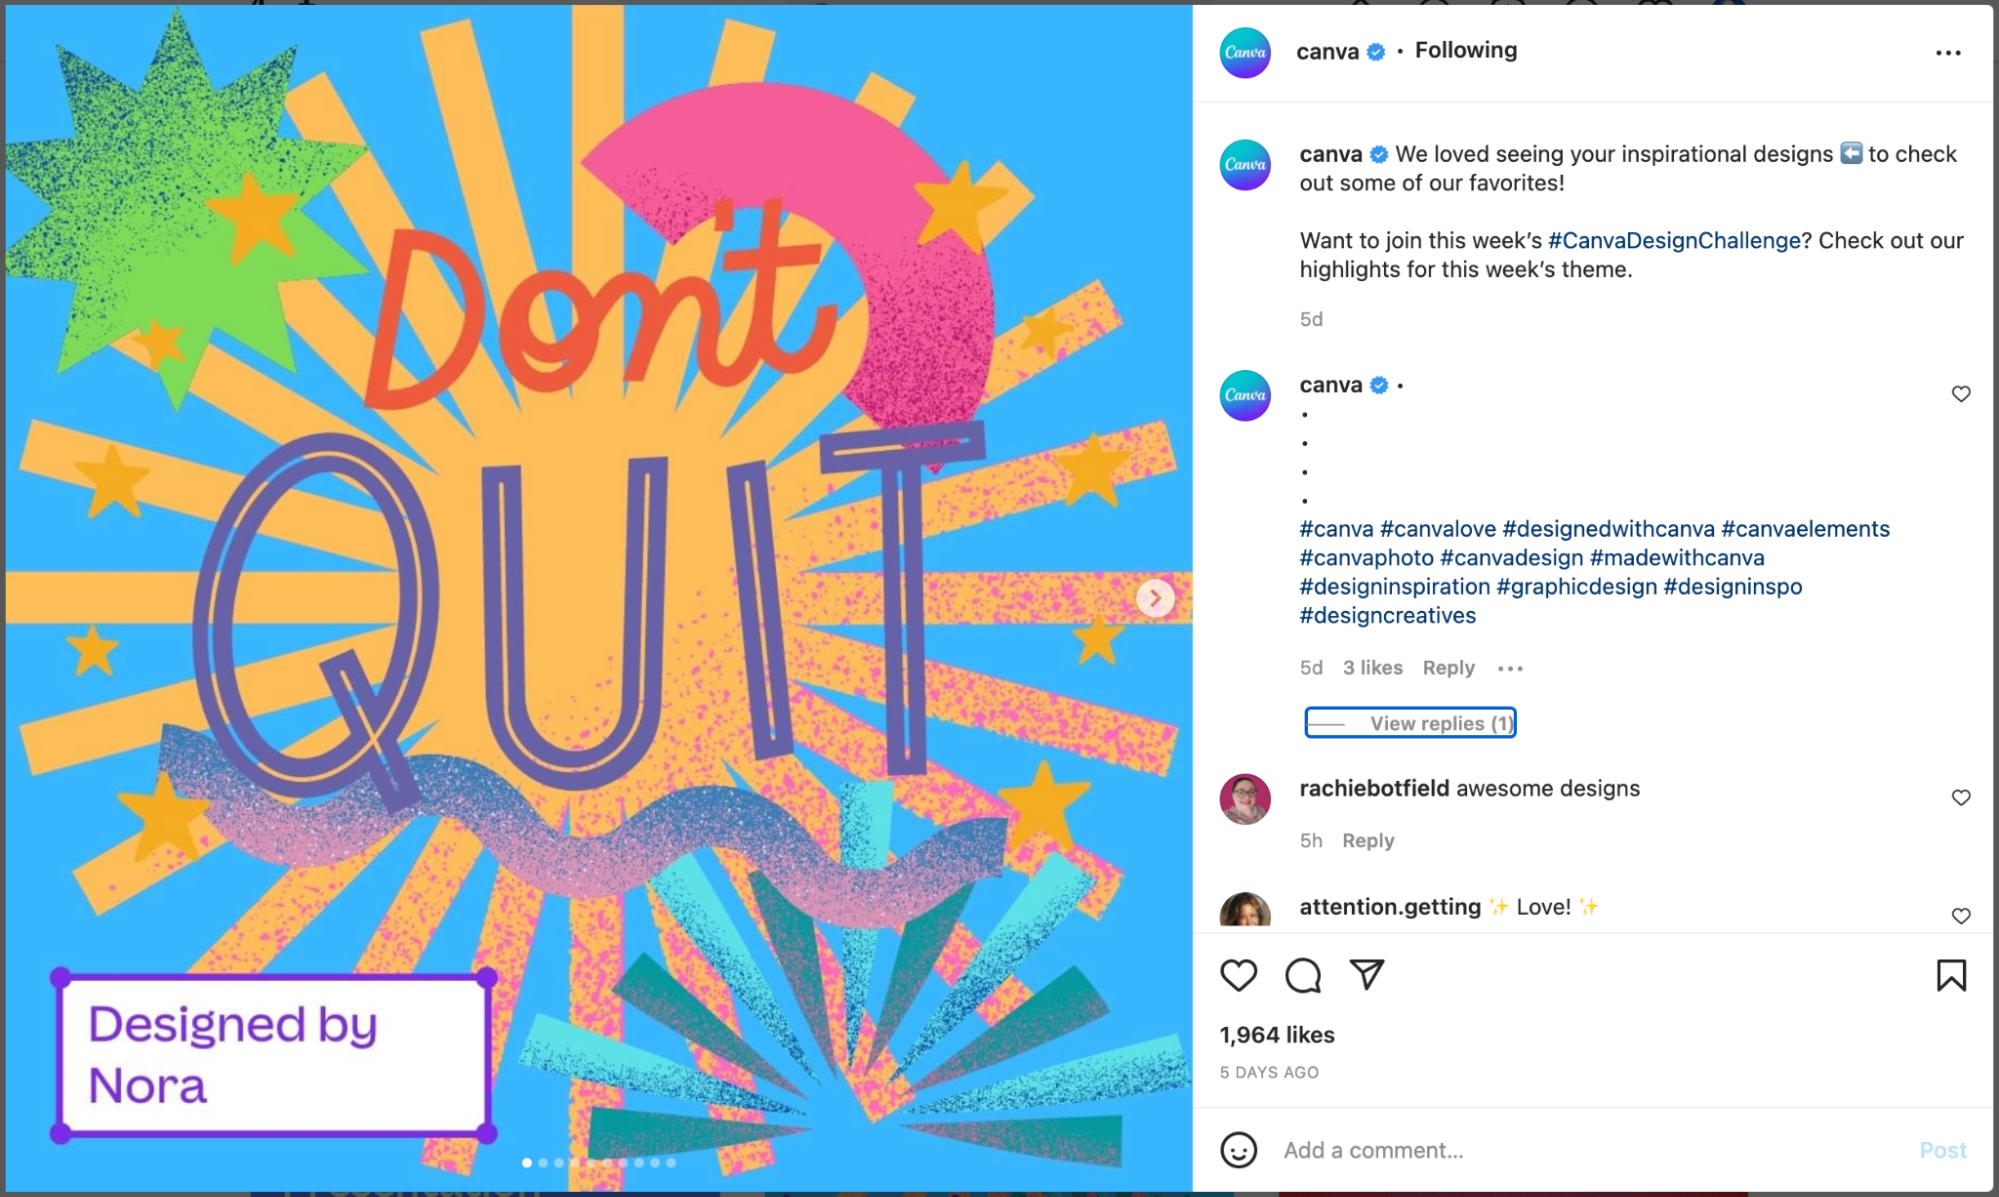 A screenshot of Canva's Instagram shows a user's graphic design featuring the words 